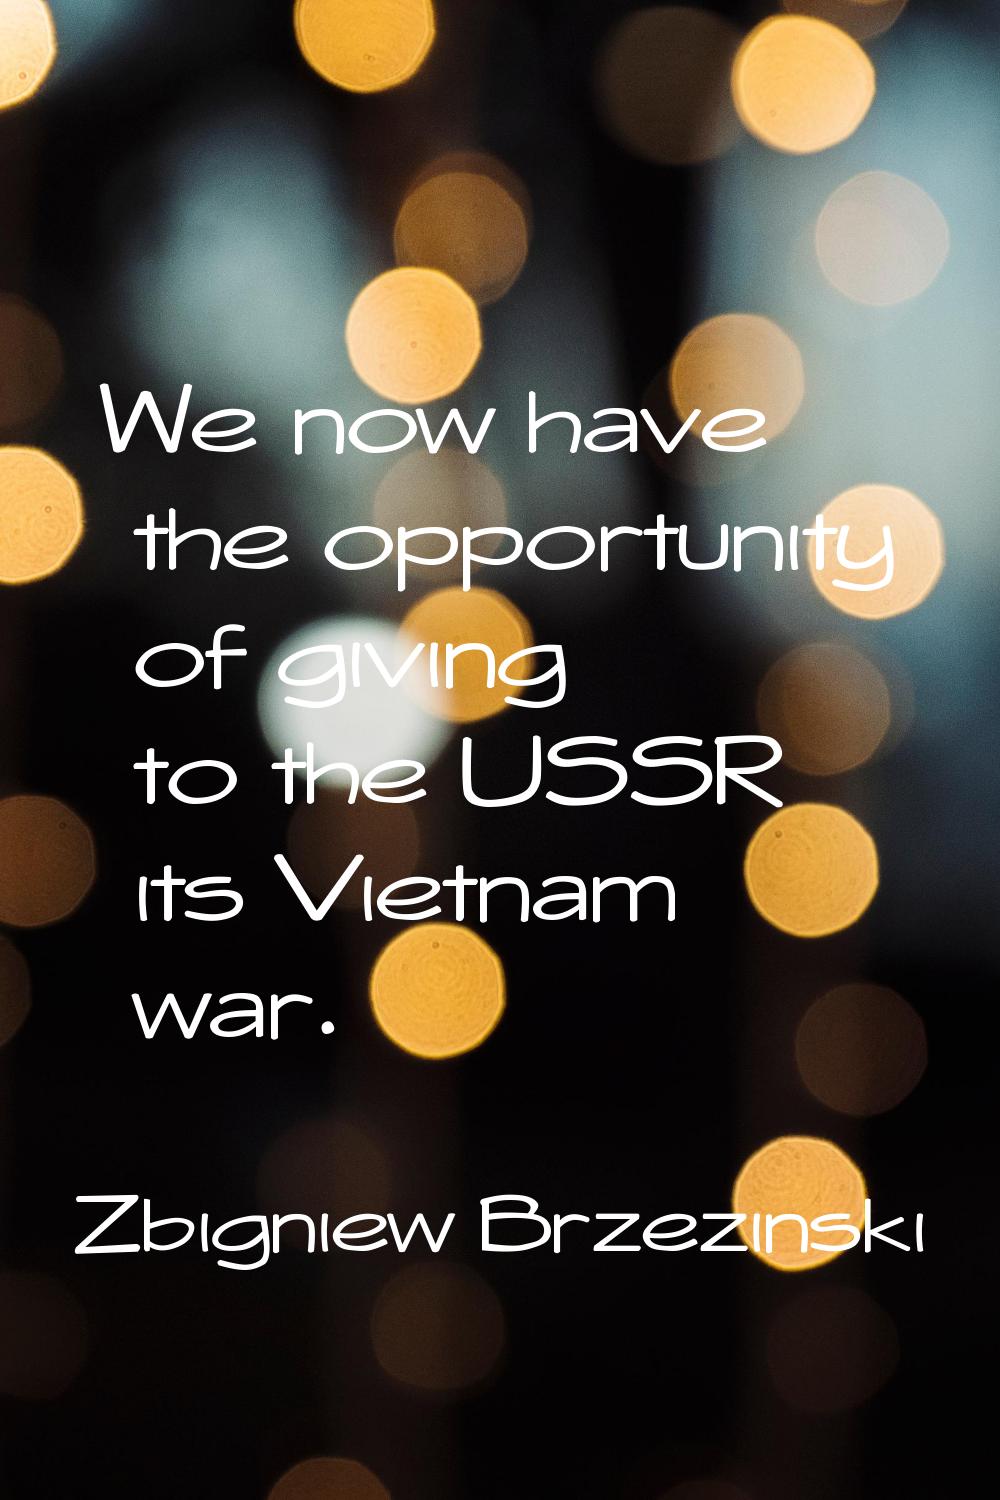 We now have the opportunity of giving to the USSR its Vietnam war.